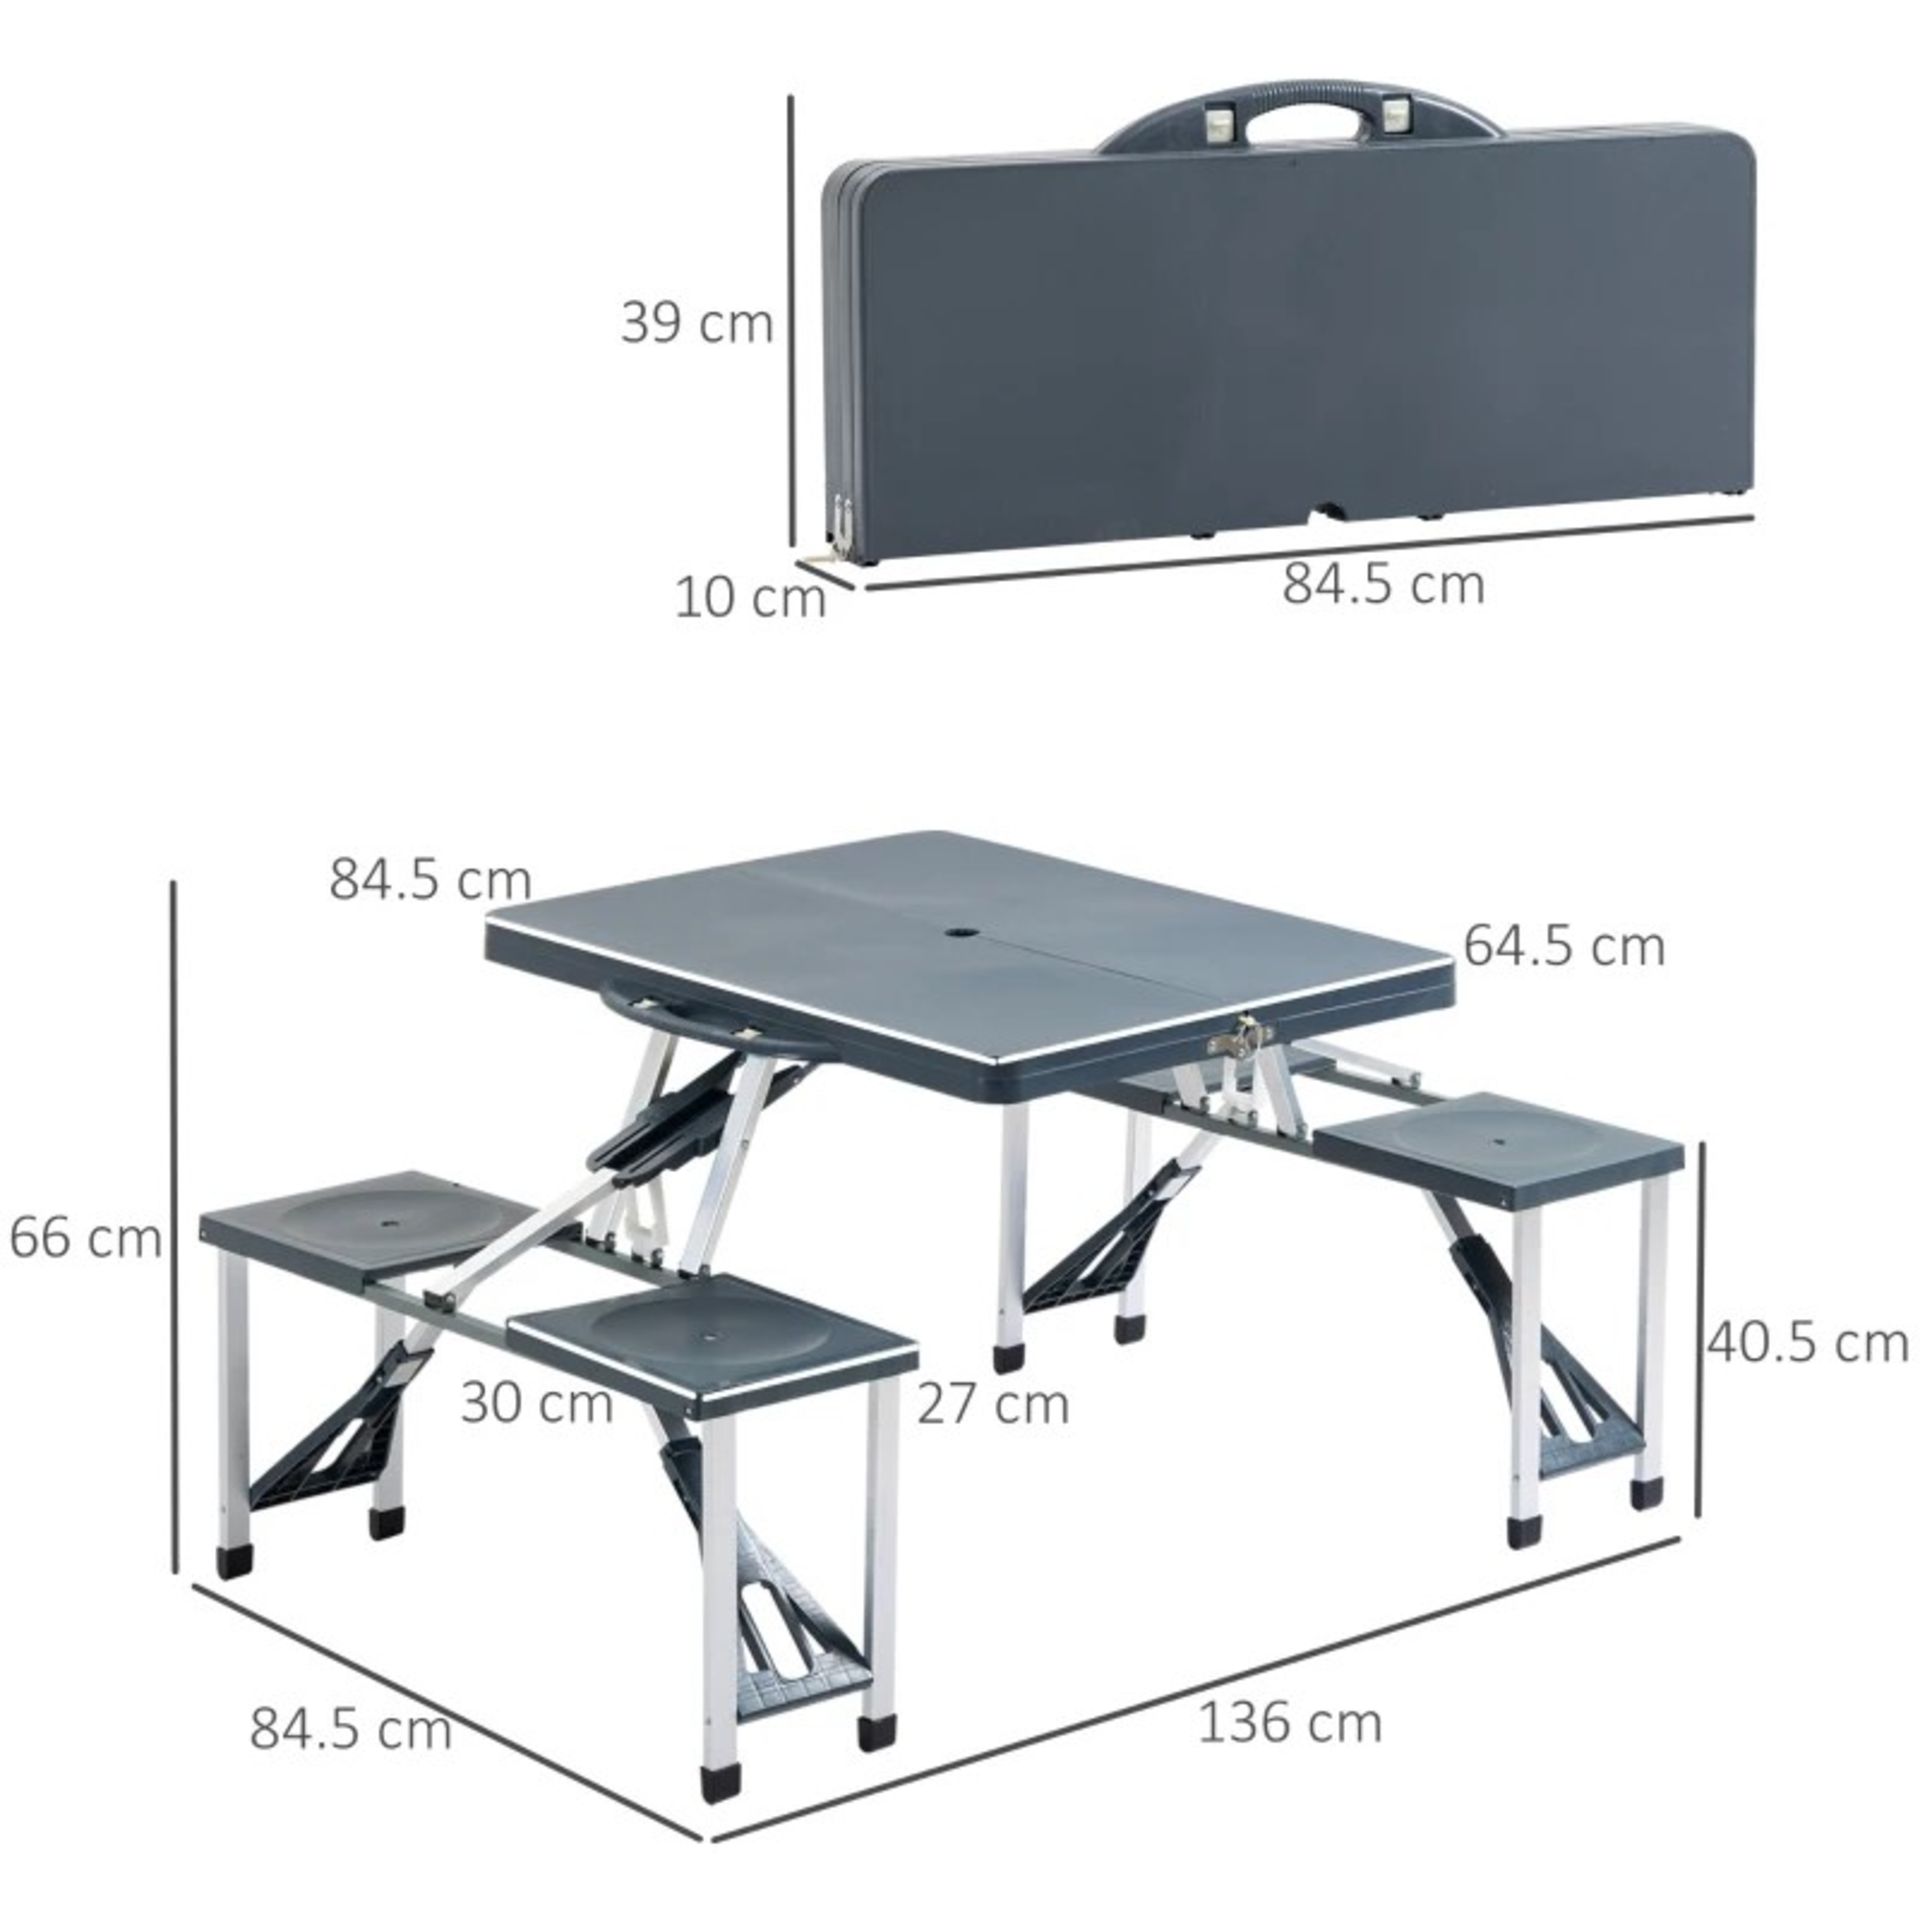 RRP £69.99 - Camping 4-Seat Table Set W/Chairs-Black/Grey - DIMENSIONS: Overall Dimension: 136L x - Image 2 of 4